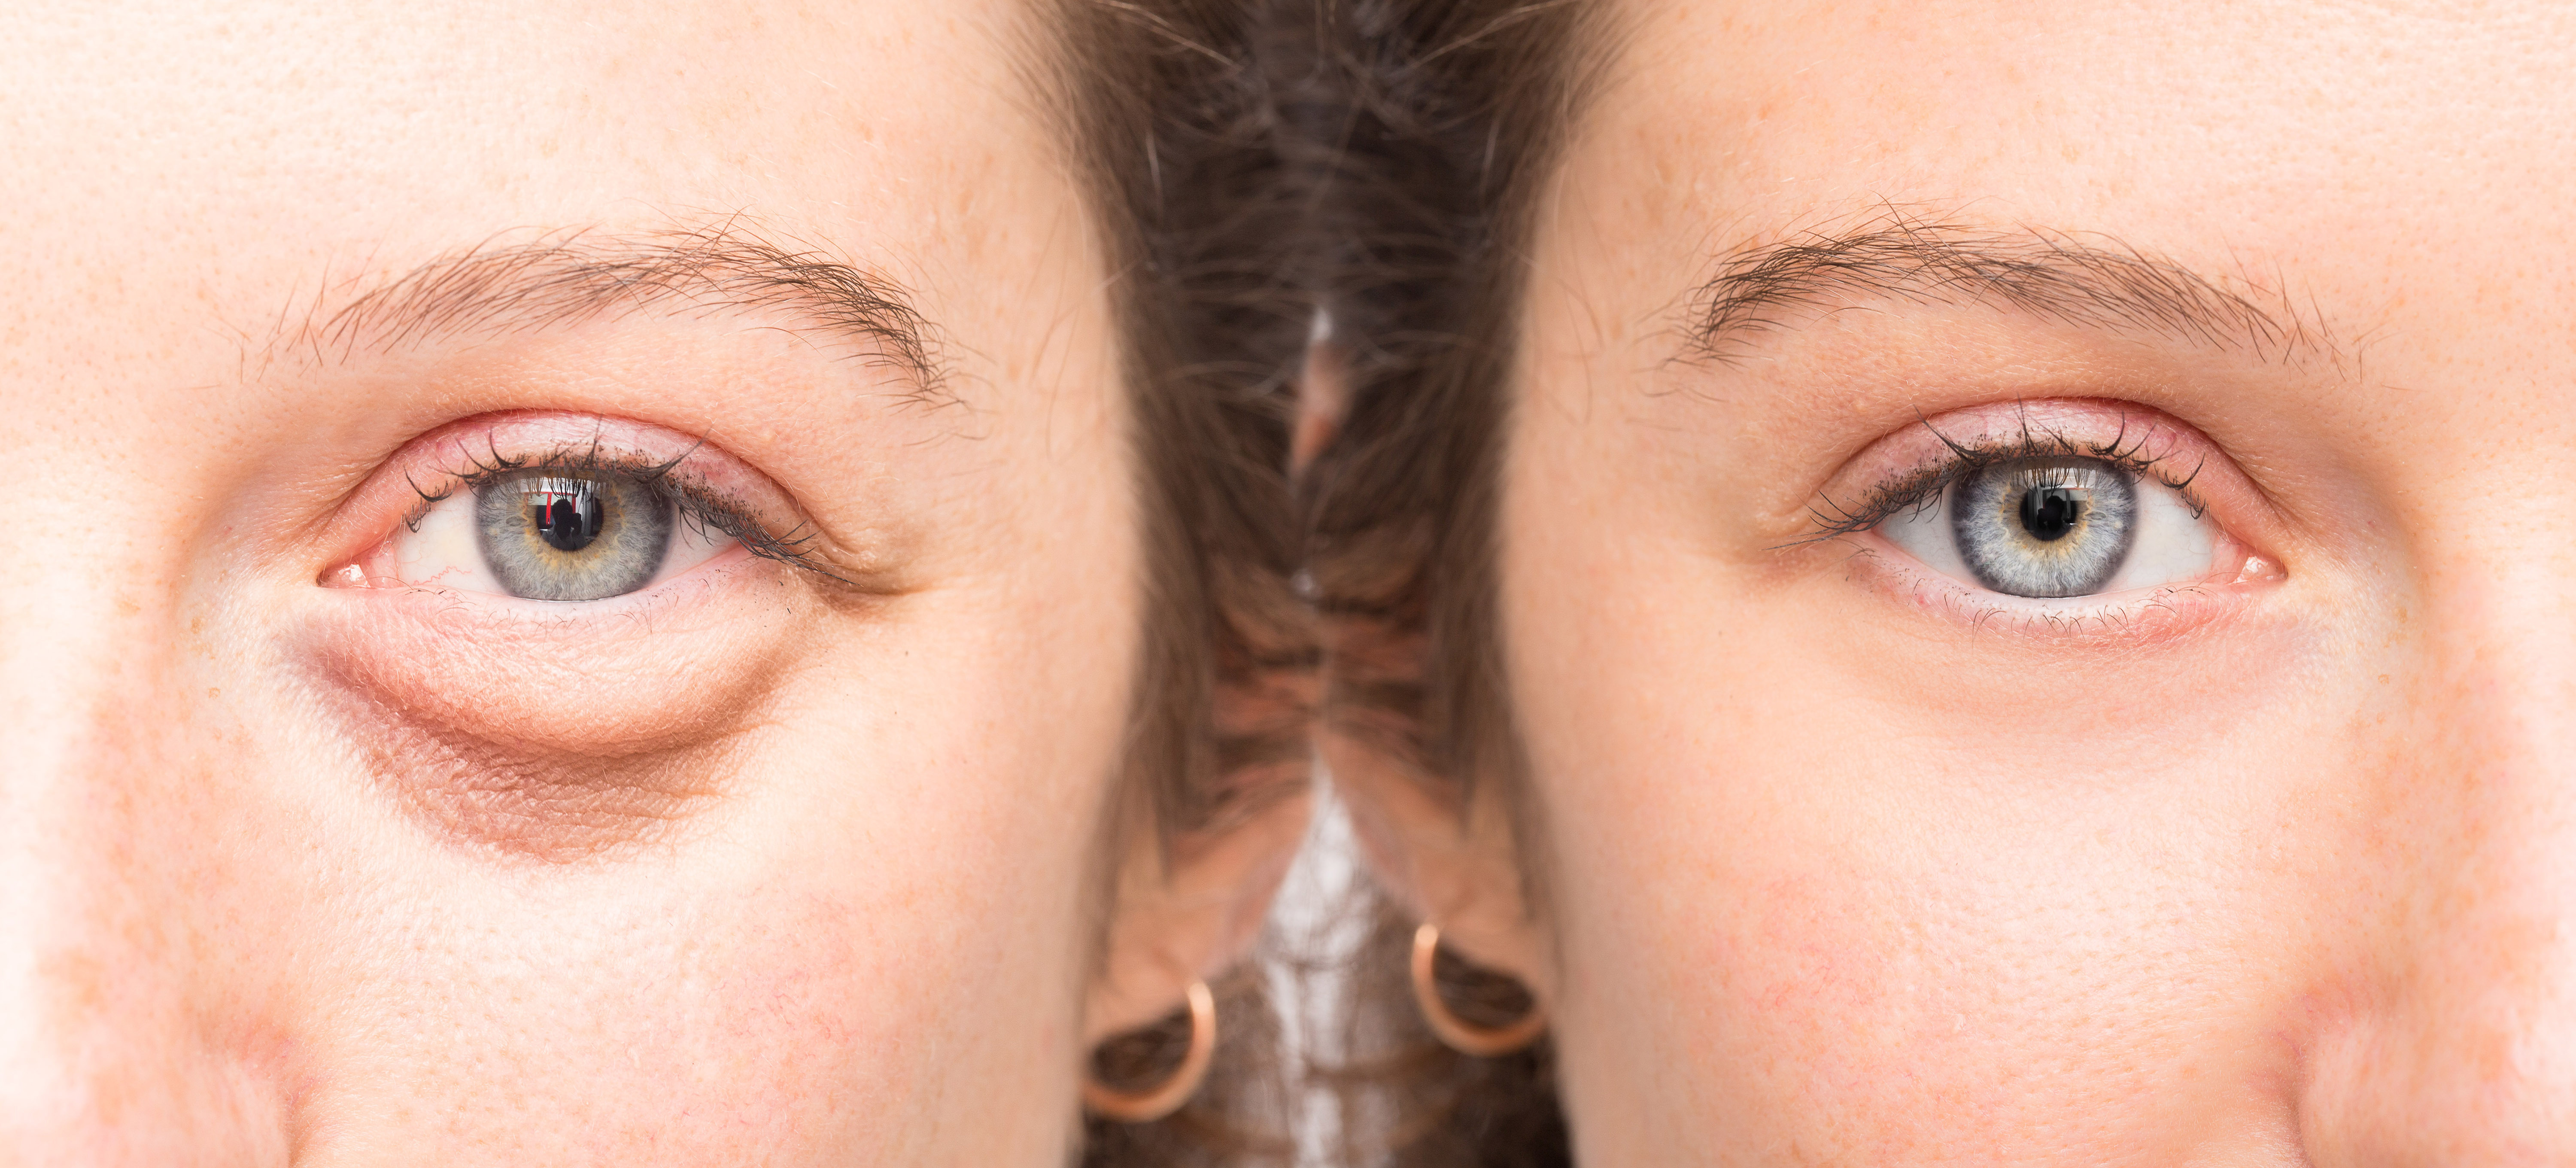 How to Get Rid of Eye Bags? - An Expert's Guide